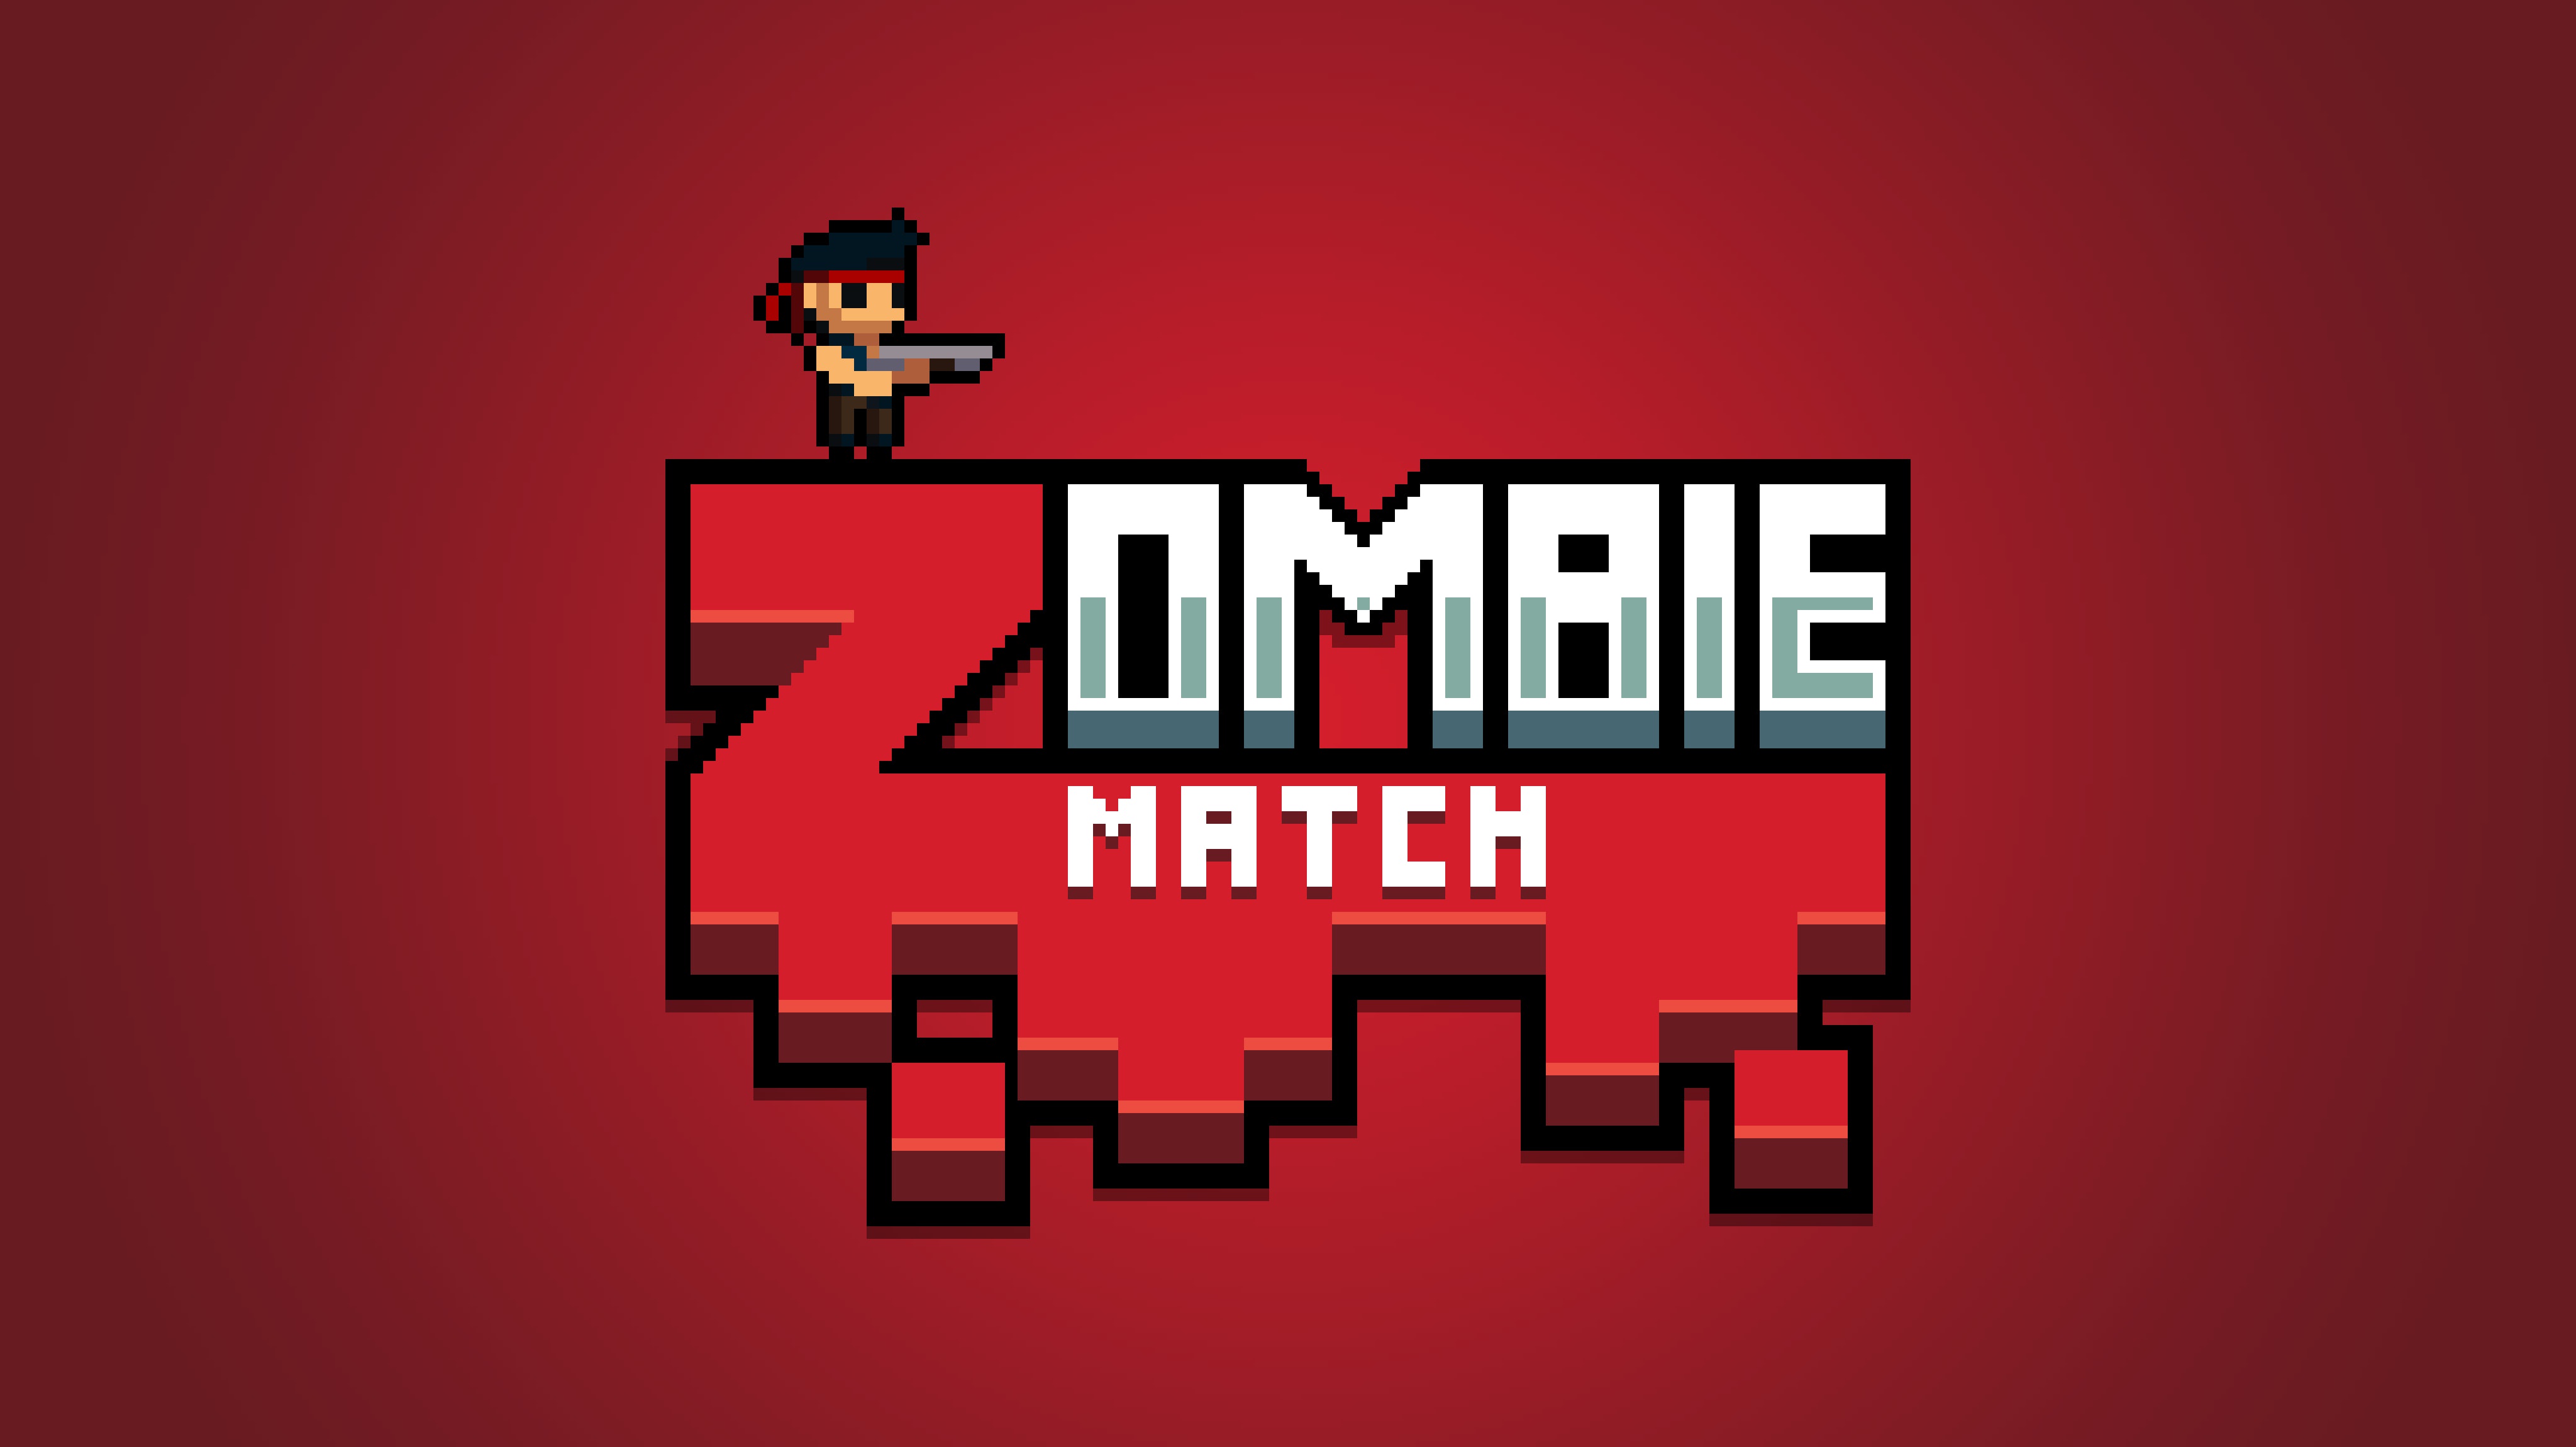 Zombie Games ➜ 100% Free & Online 